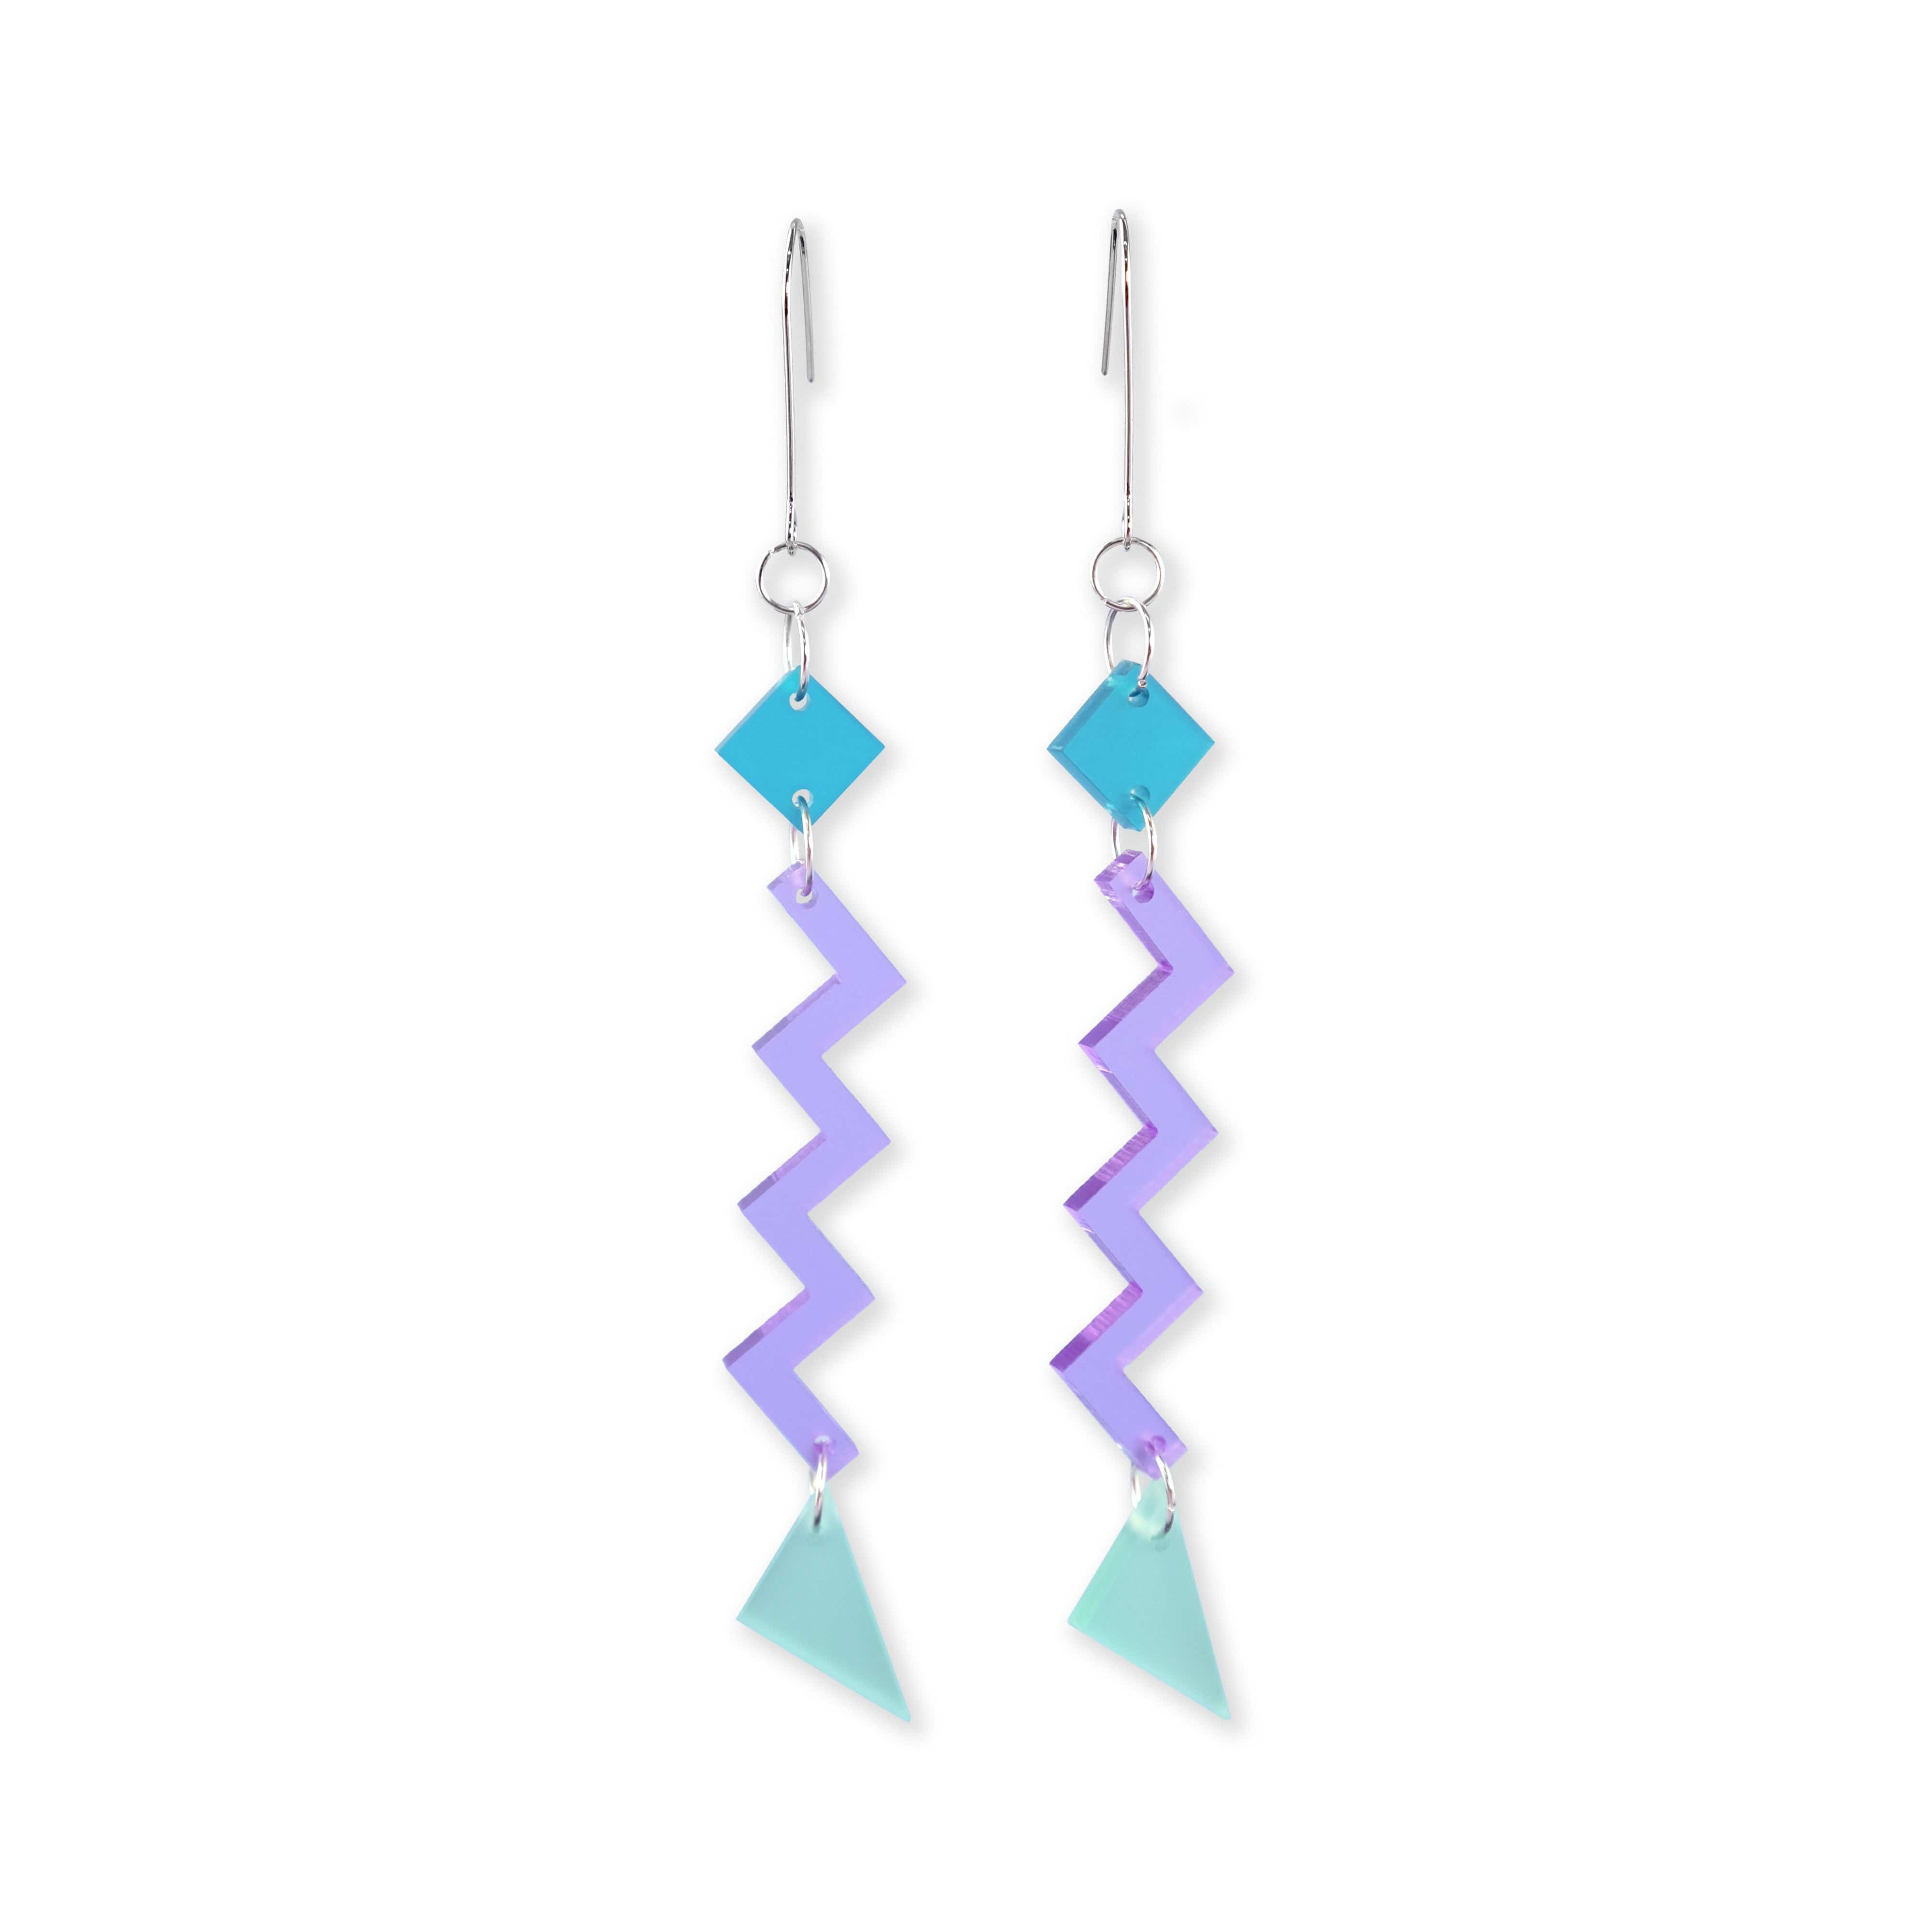 Fun and funky statement Geometric Zig Zag dangly Earrings with a retro vibe #color_90s